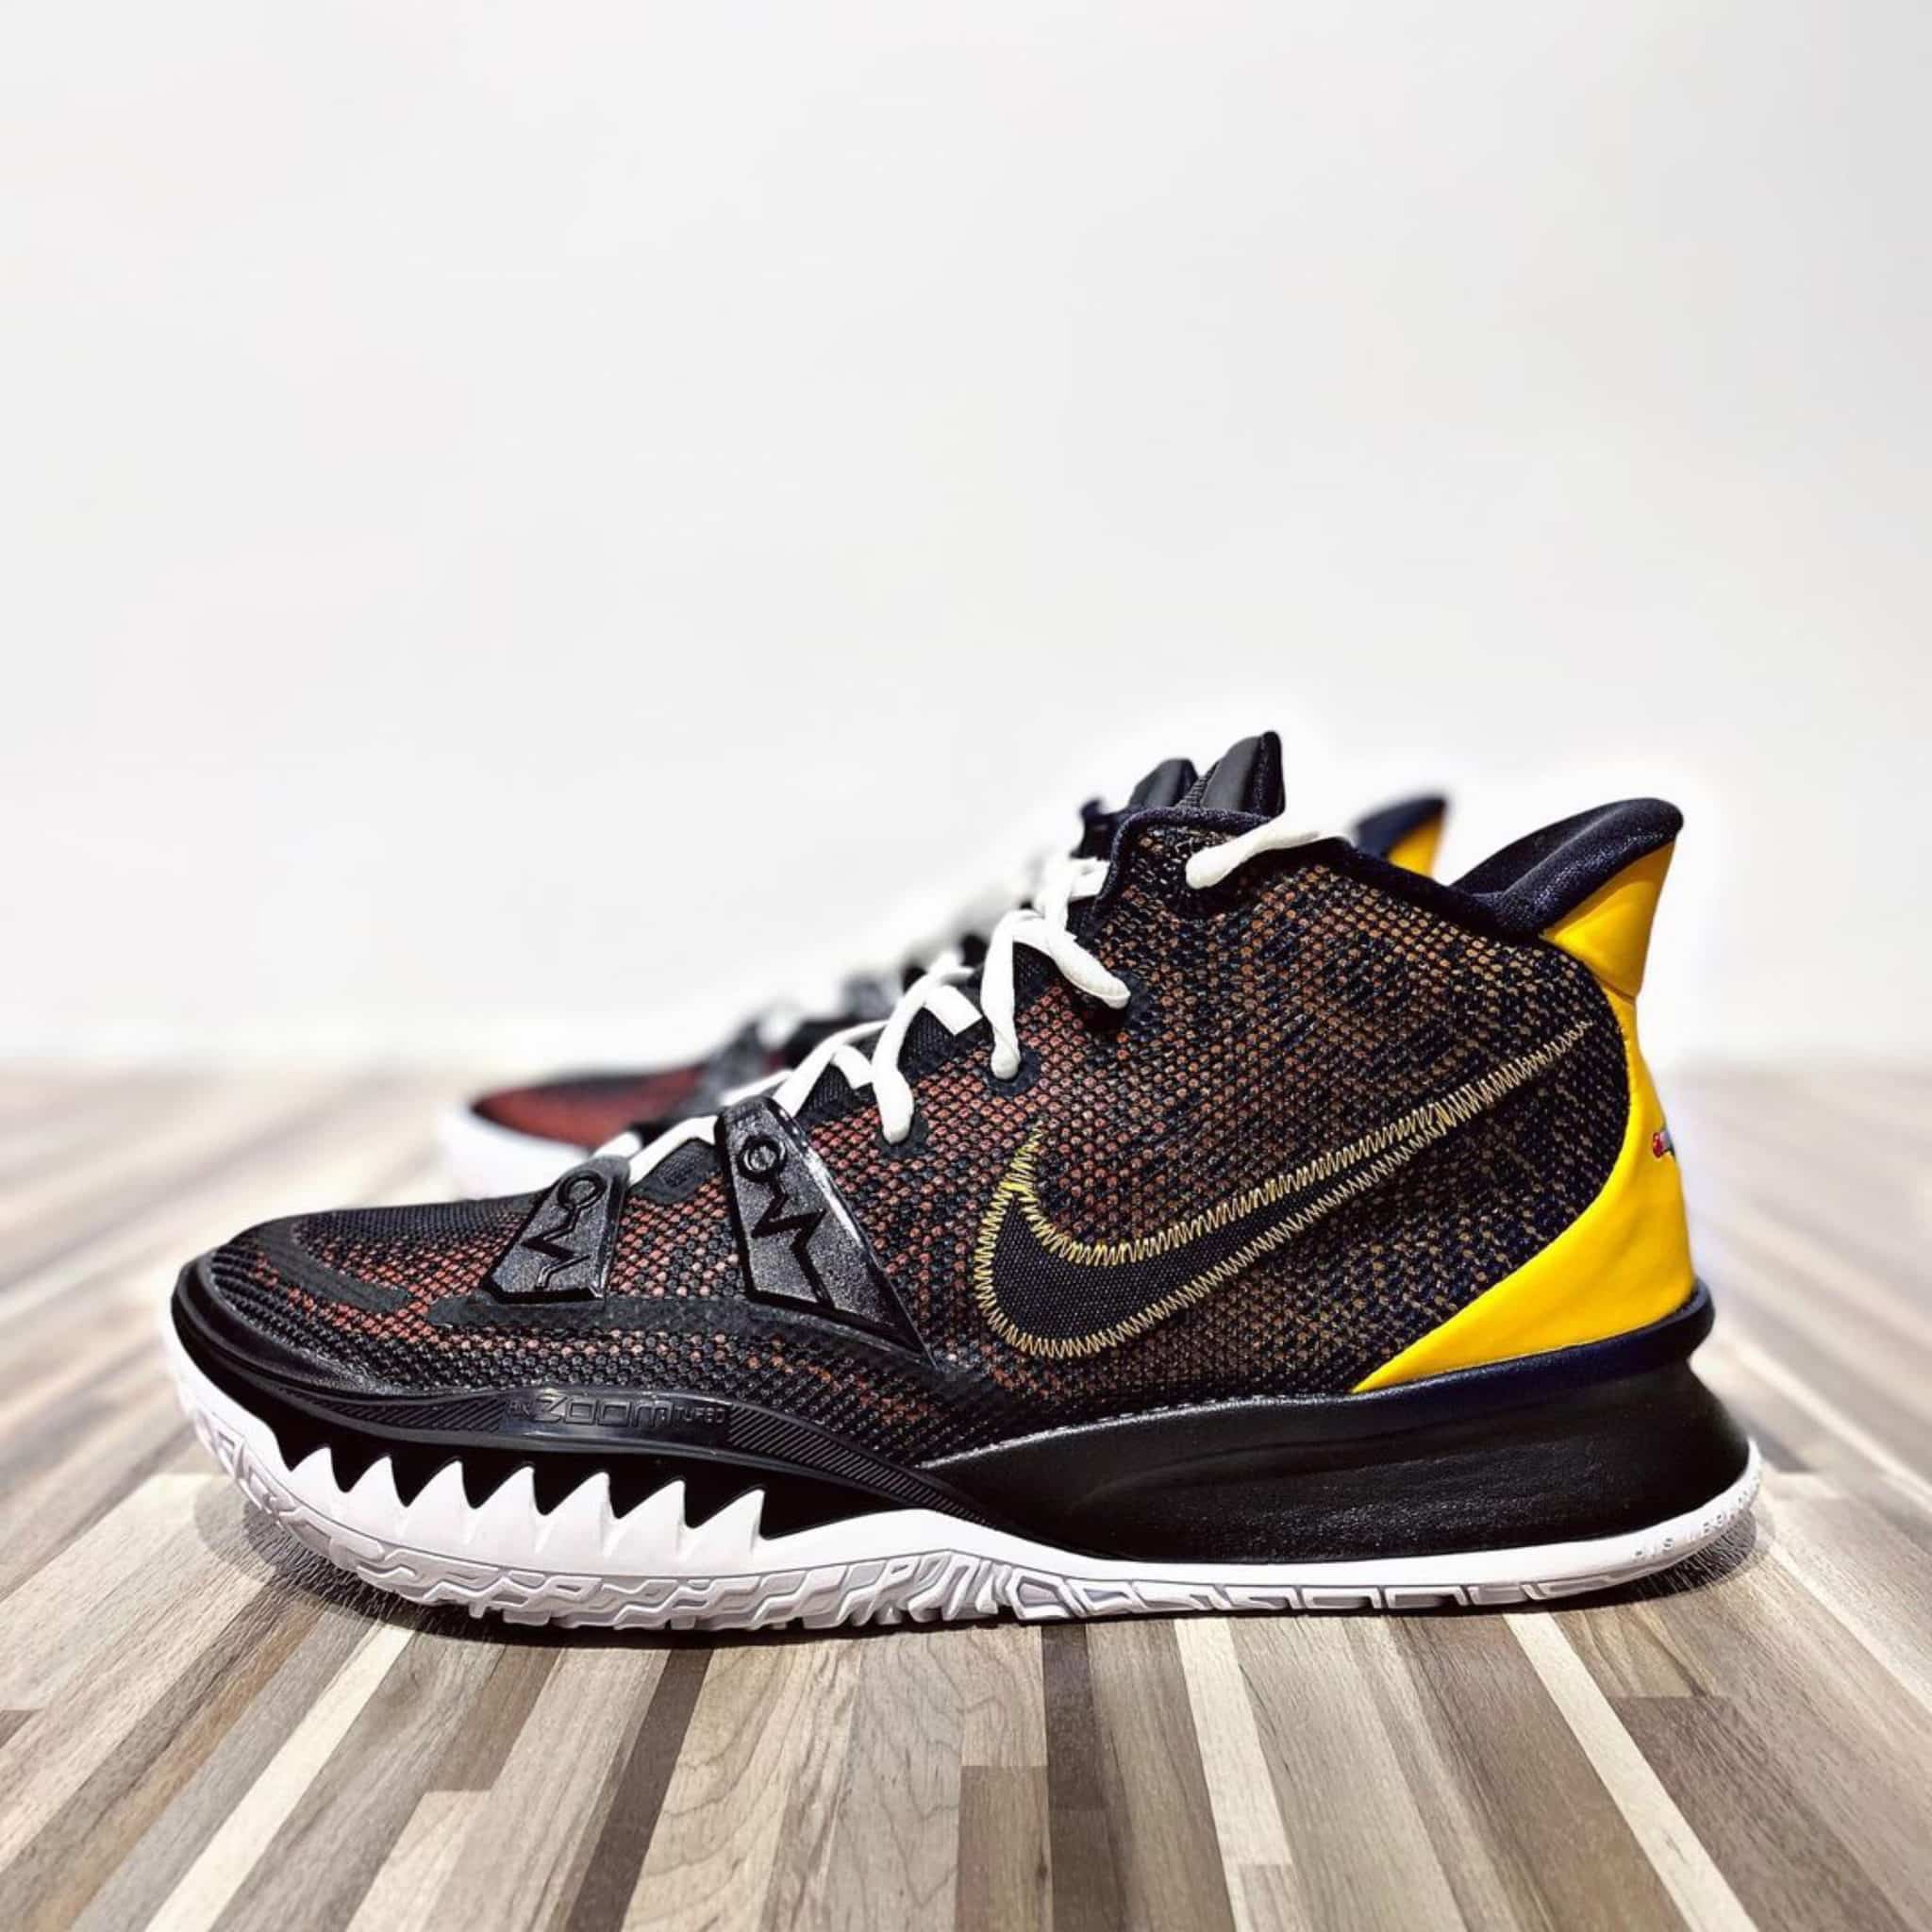 official release date for the Kyrie 7 “Rayguns” is now January 15, 2021